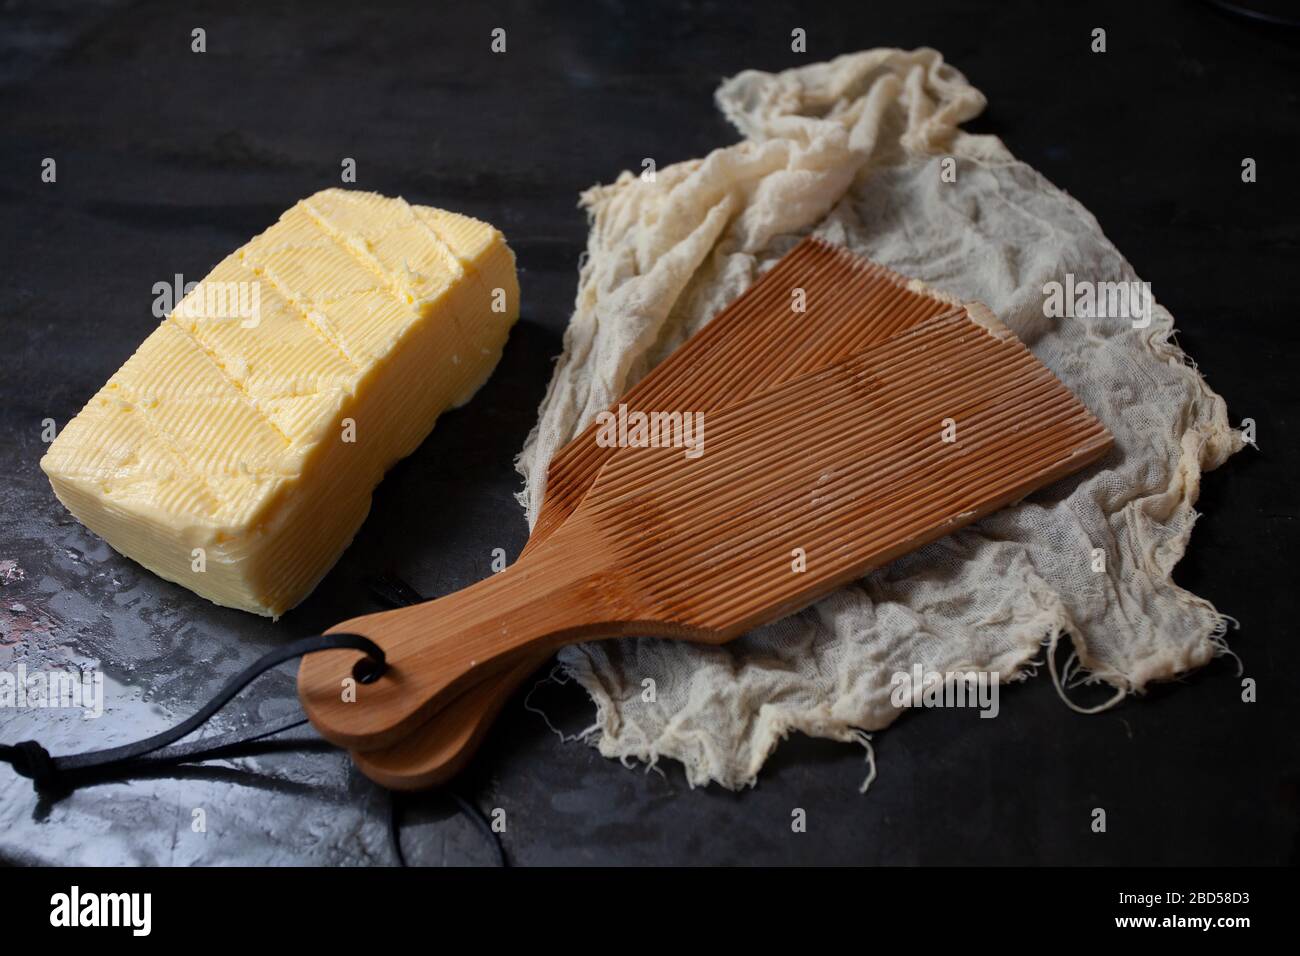 Butter Paddle